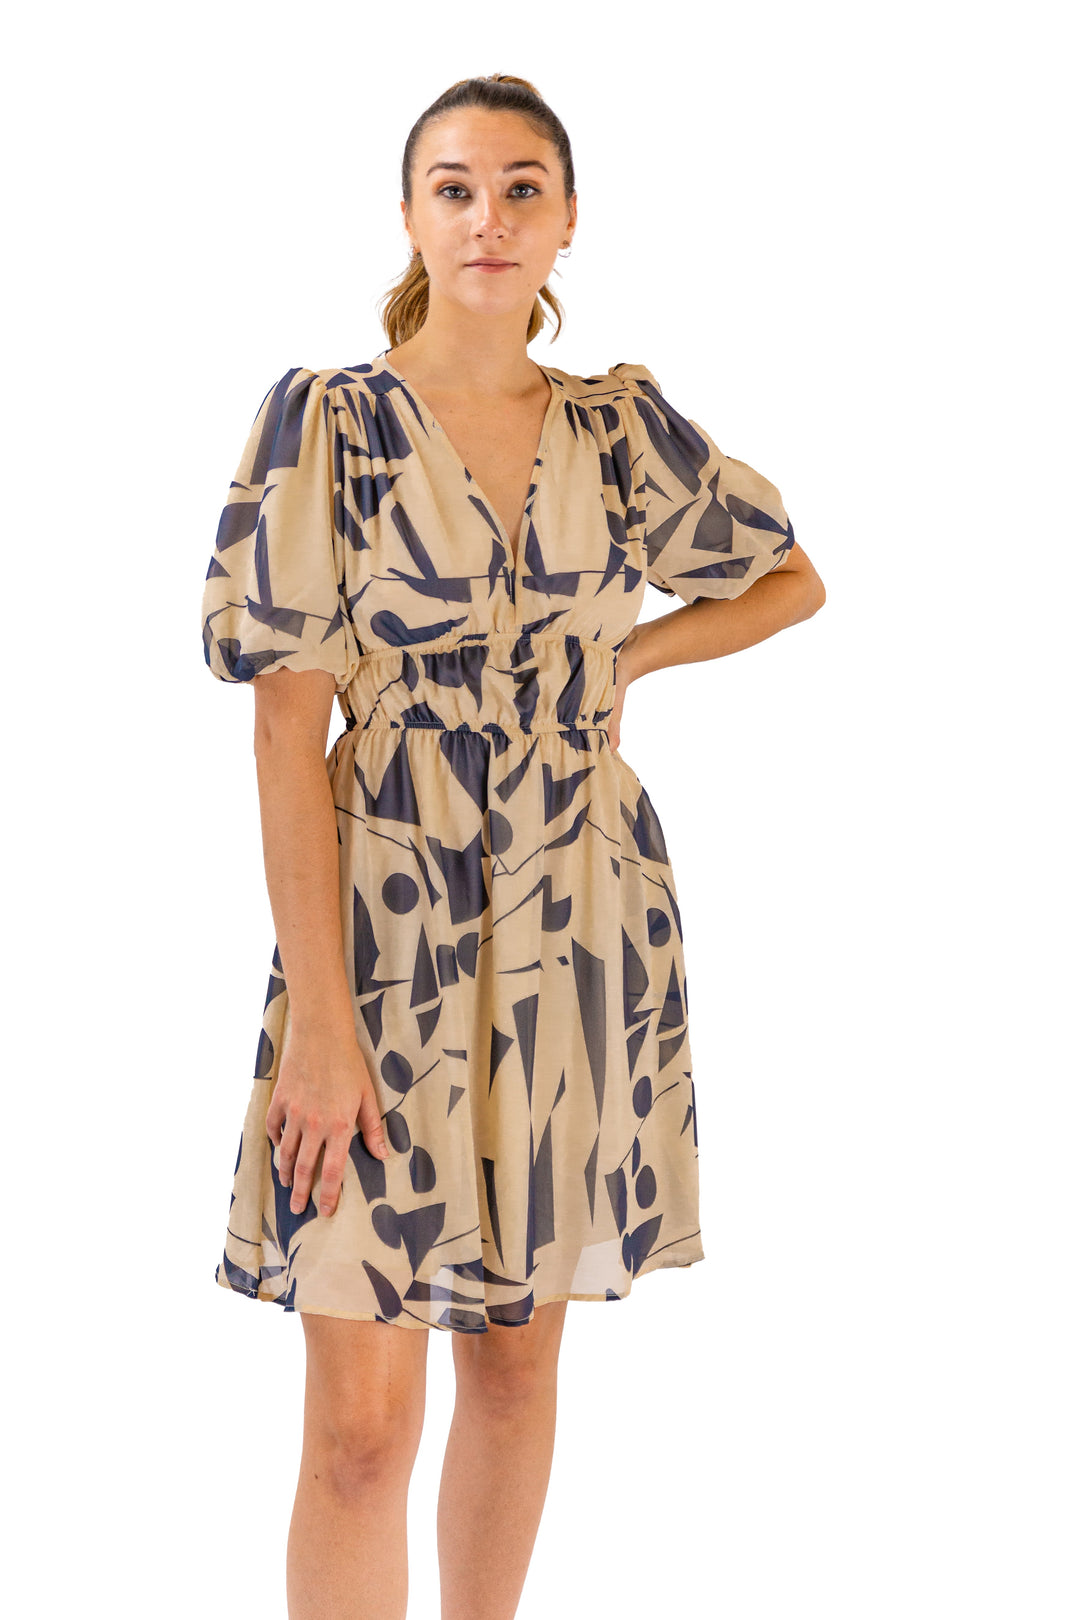 Stand Out in Style with the Chic Abstract Beige Midi Dress